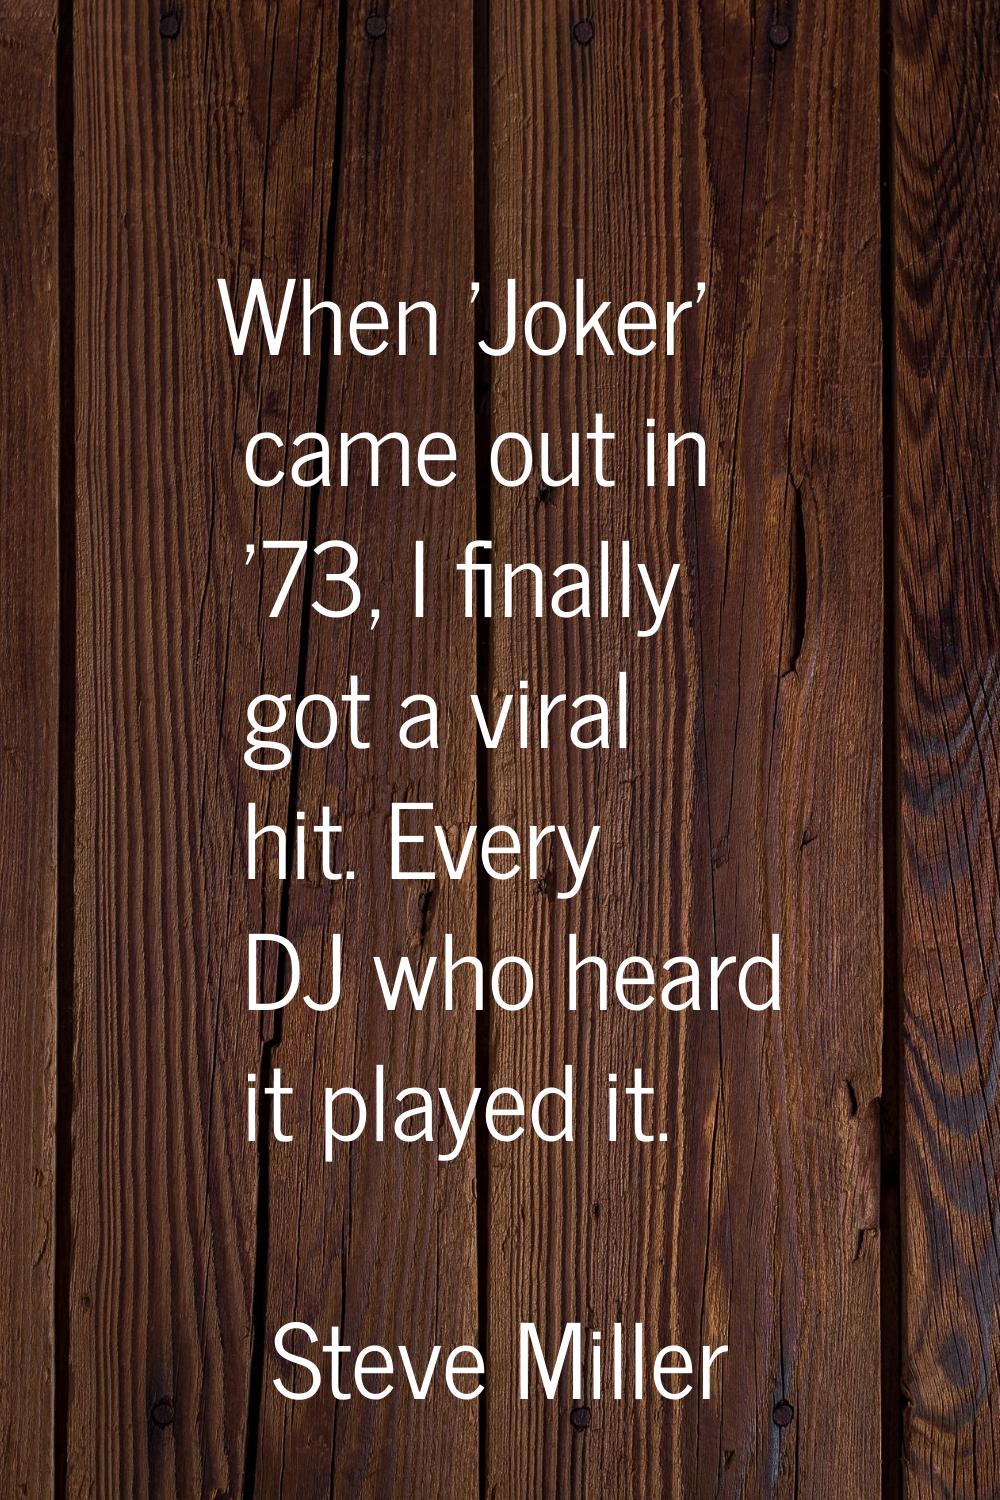 When 'Joker' came out in '73, I finally got a viral hit. Every DJ who heard it played it.